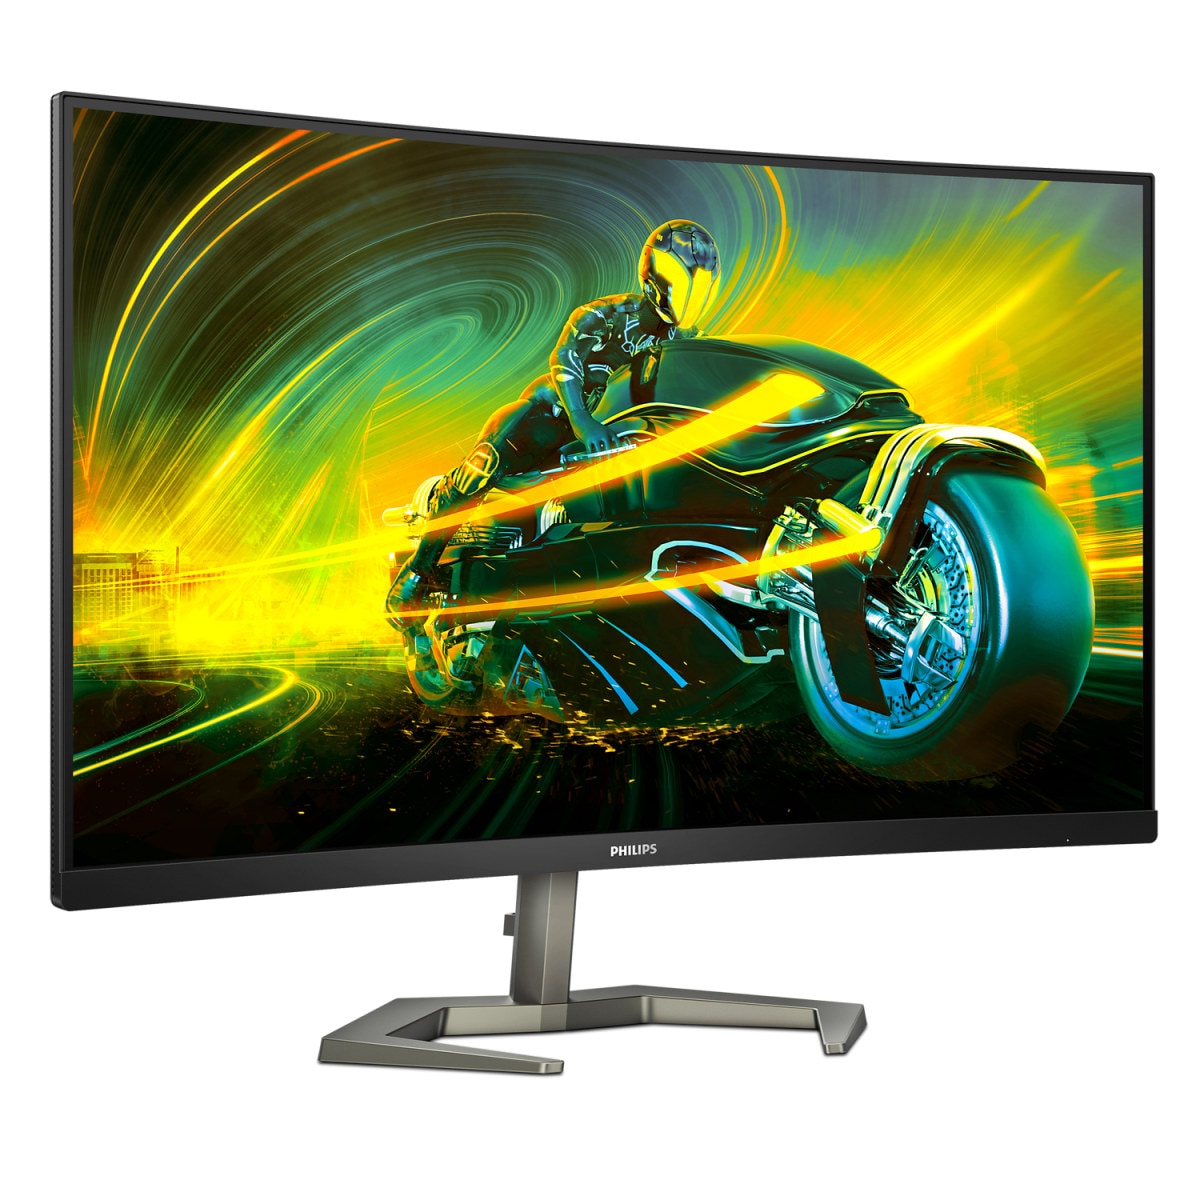 Philips Curved-Gaming-Monitor »32M1C5500VL«, 80 cm/32 Zoll, 2560 x 1440 px, 1 ms Reaktionszeit, 165 Hz